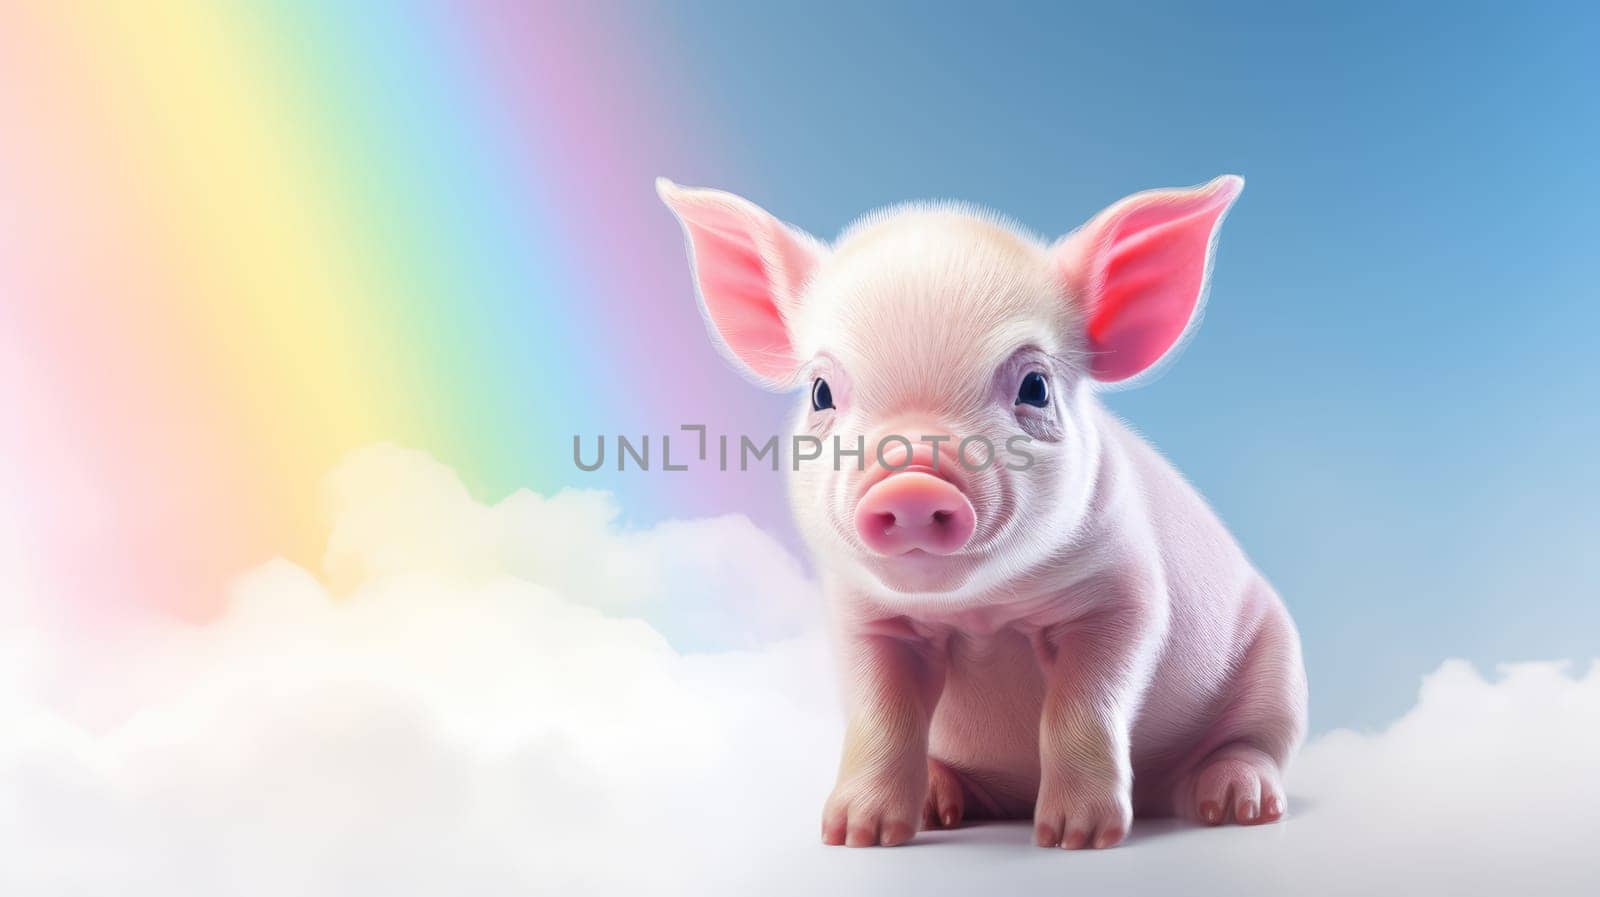 An adorable baby piglet sitting on white clouds with rainbow on blue sky background, showcasing its innocence and charm. by JuliaDorian